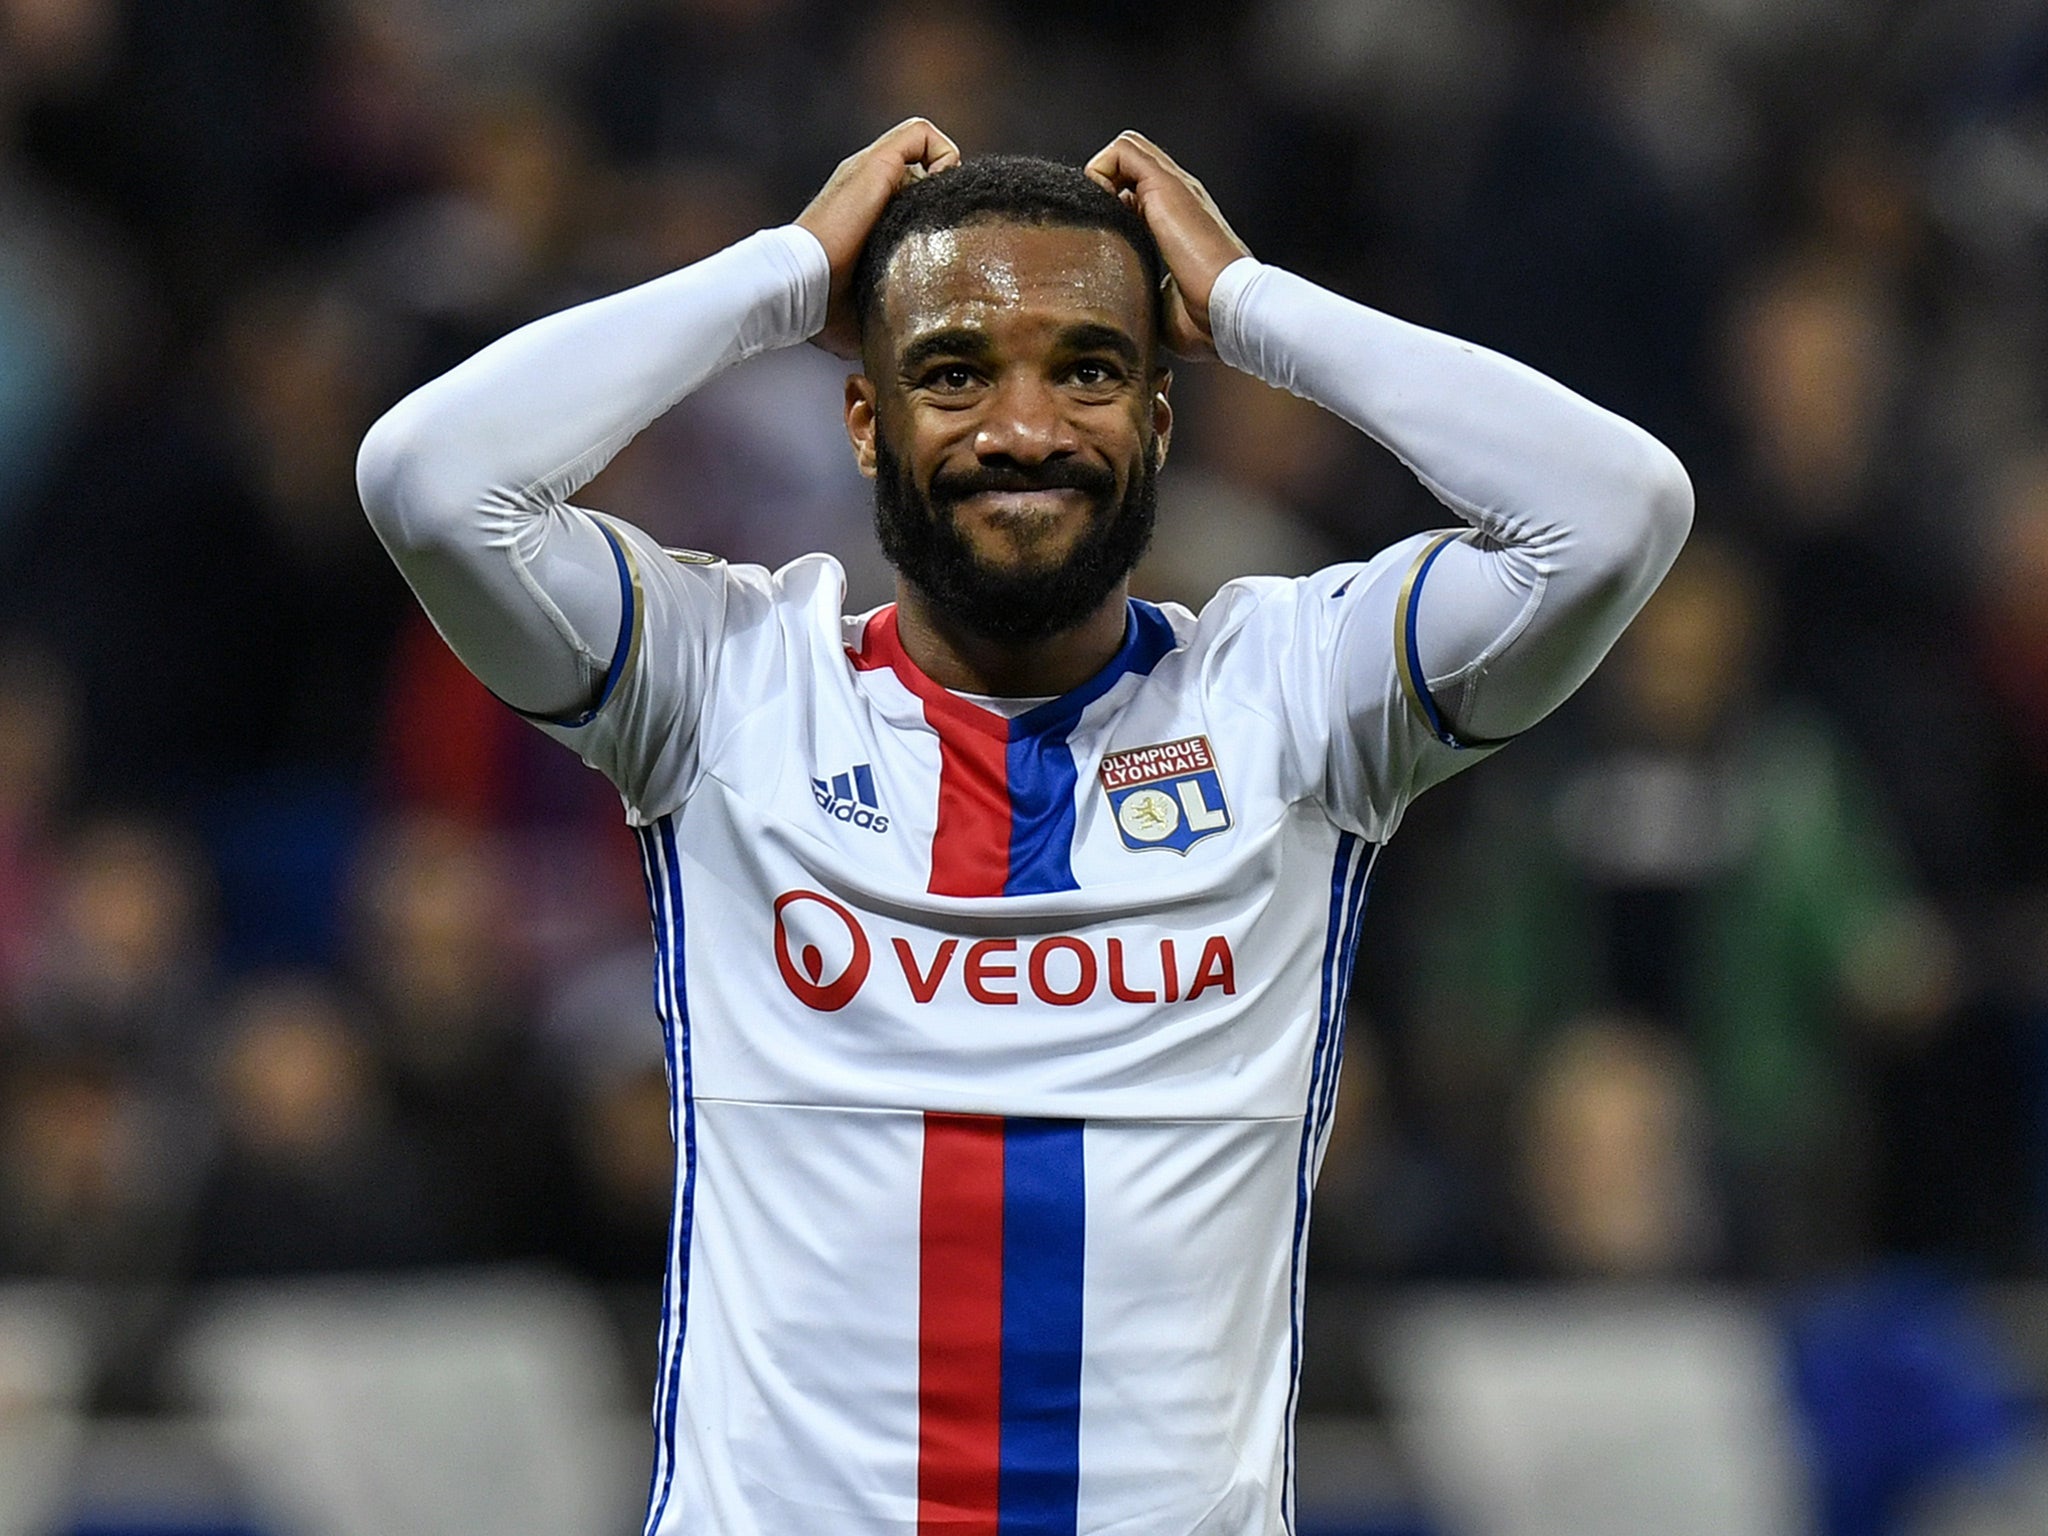 The joy of Lacazette's arrival could be short-lived should Alexis Sanchez be sold this summer